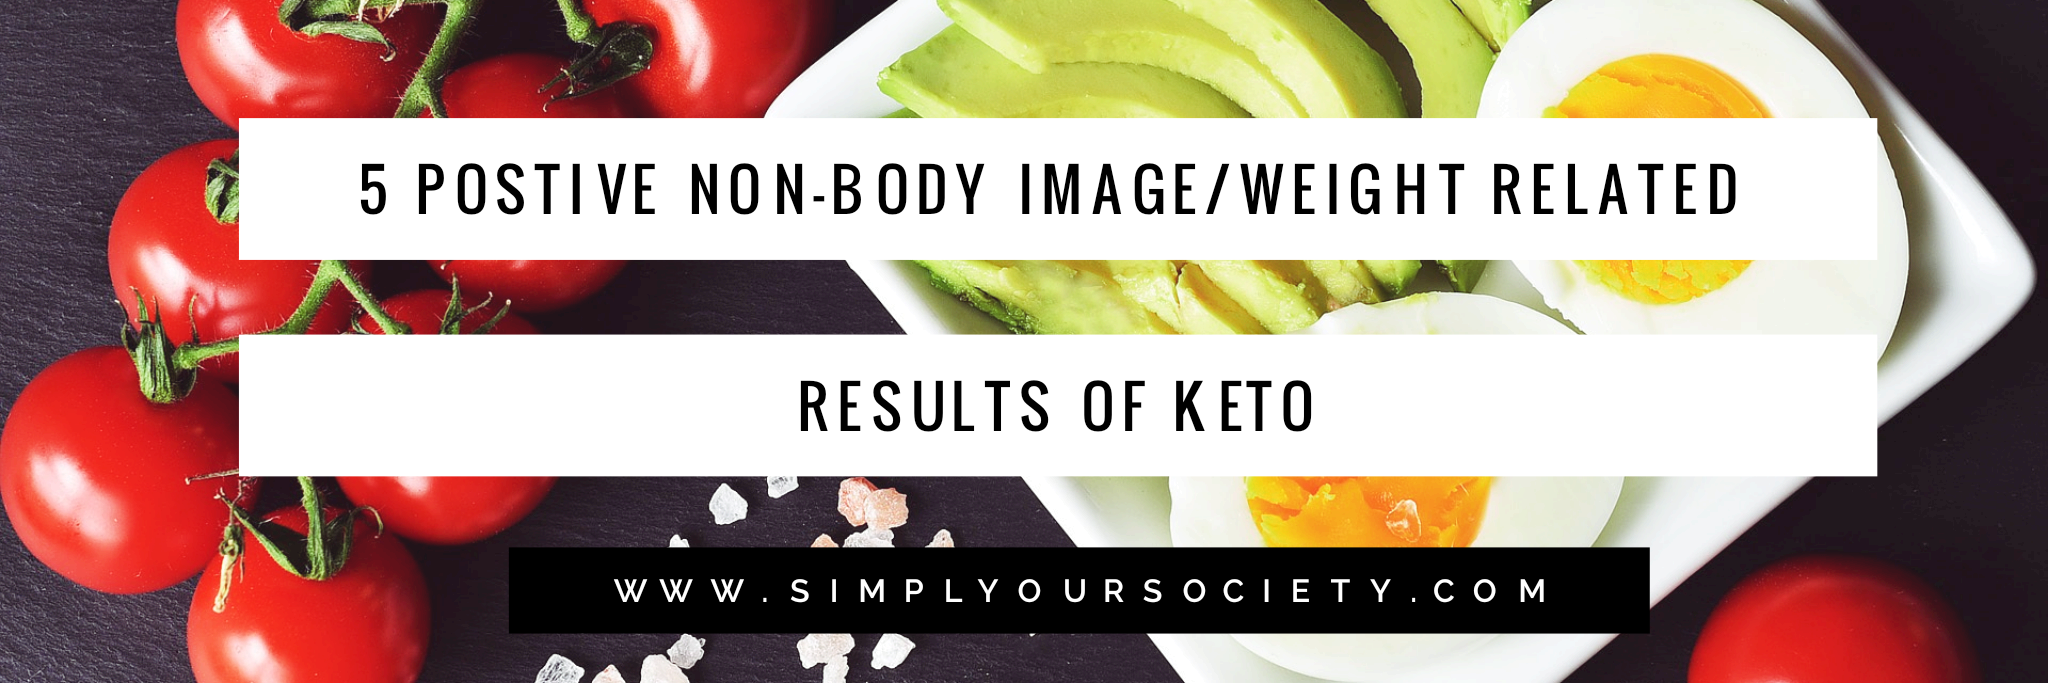 keto ketogenic diet keto foods cooking nutrition health healthy weightloss eating body image low carb 